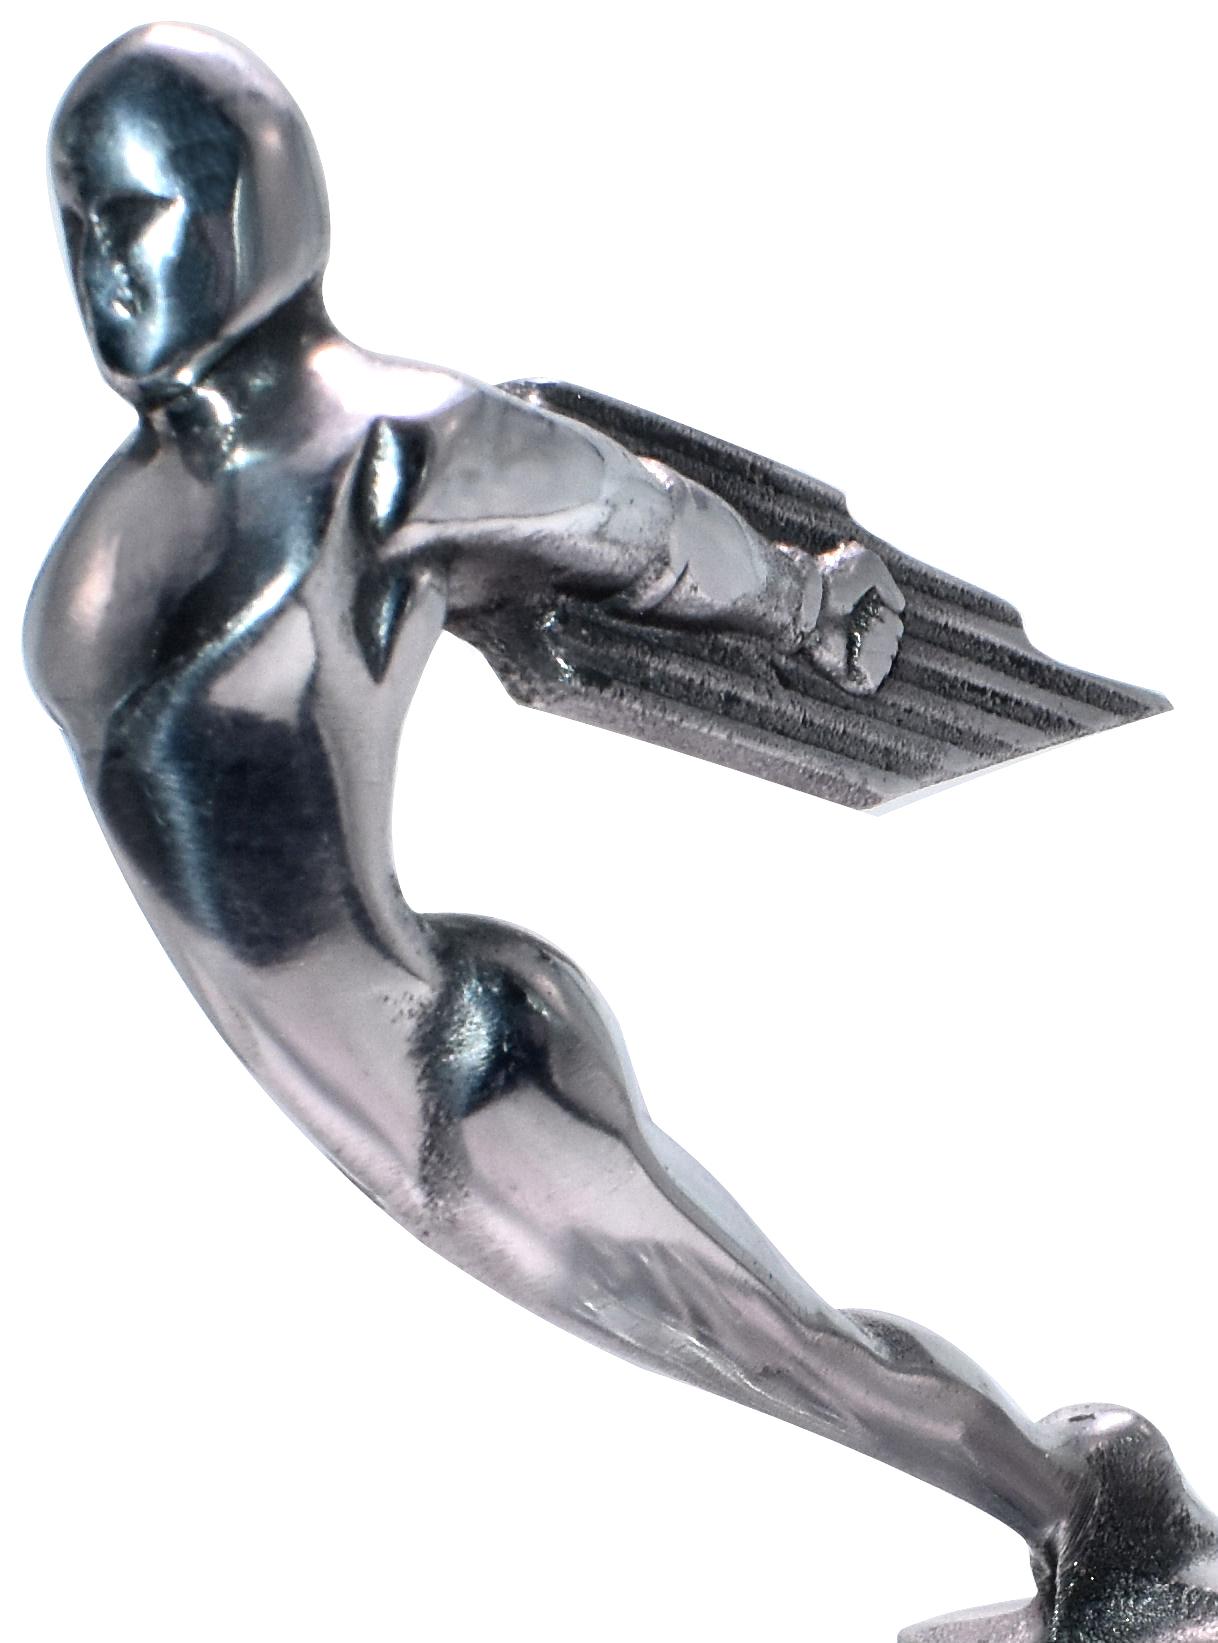 Stunning Art Deco chrome car mascot mounted on a solid block of Swedish art glass. The mascot is original to the 1930s the base of course is a later addition and makes for a perfect paper weight or just an ornament to appreciate. Condition is very